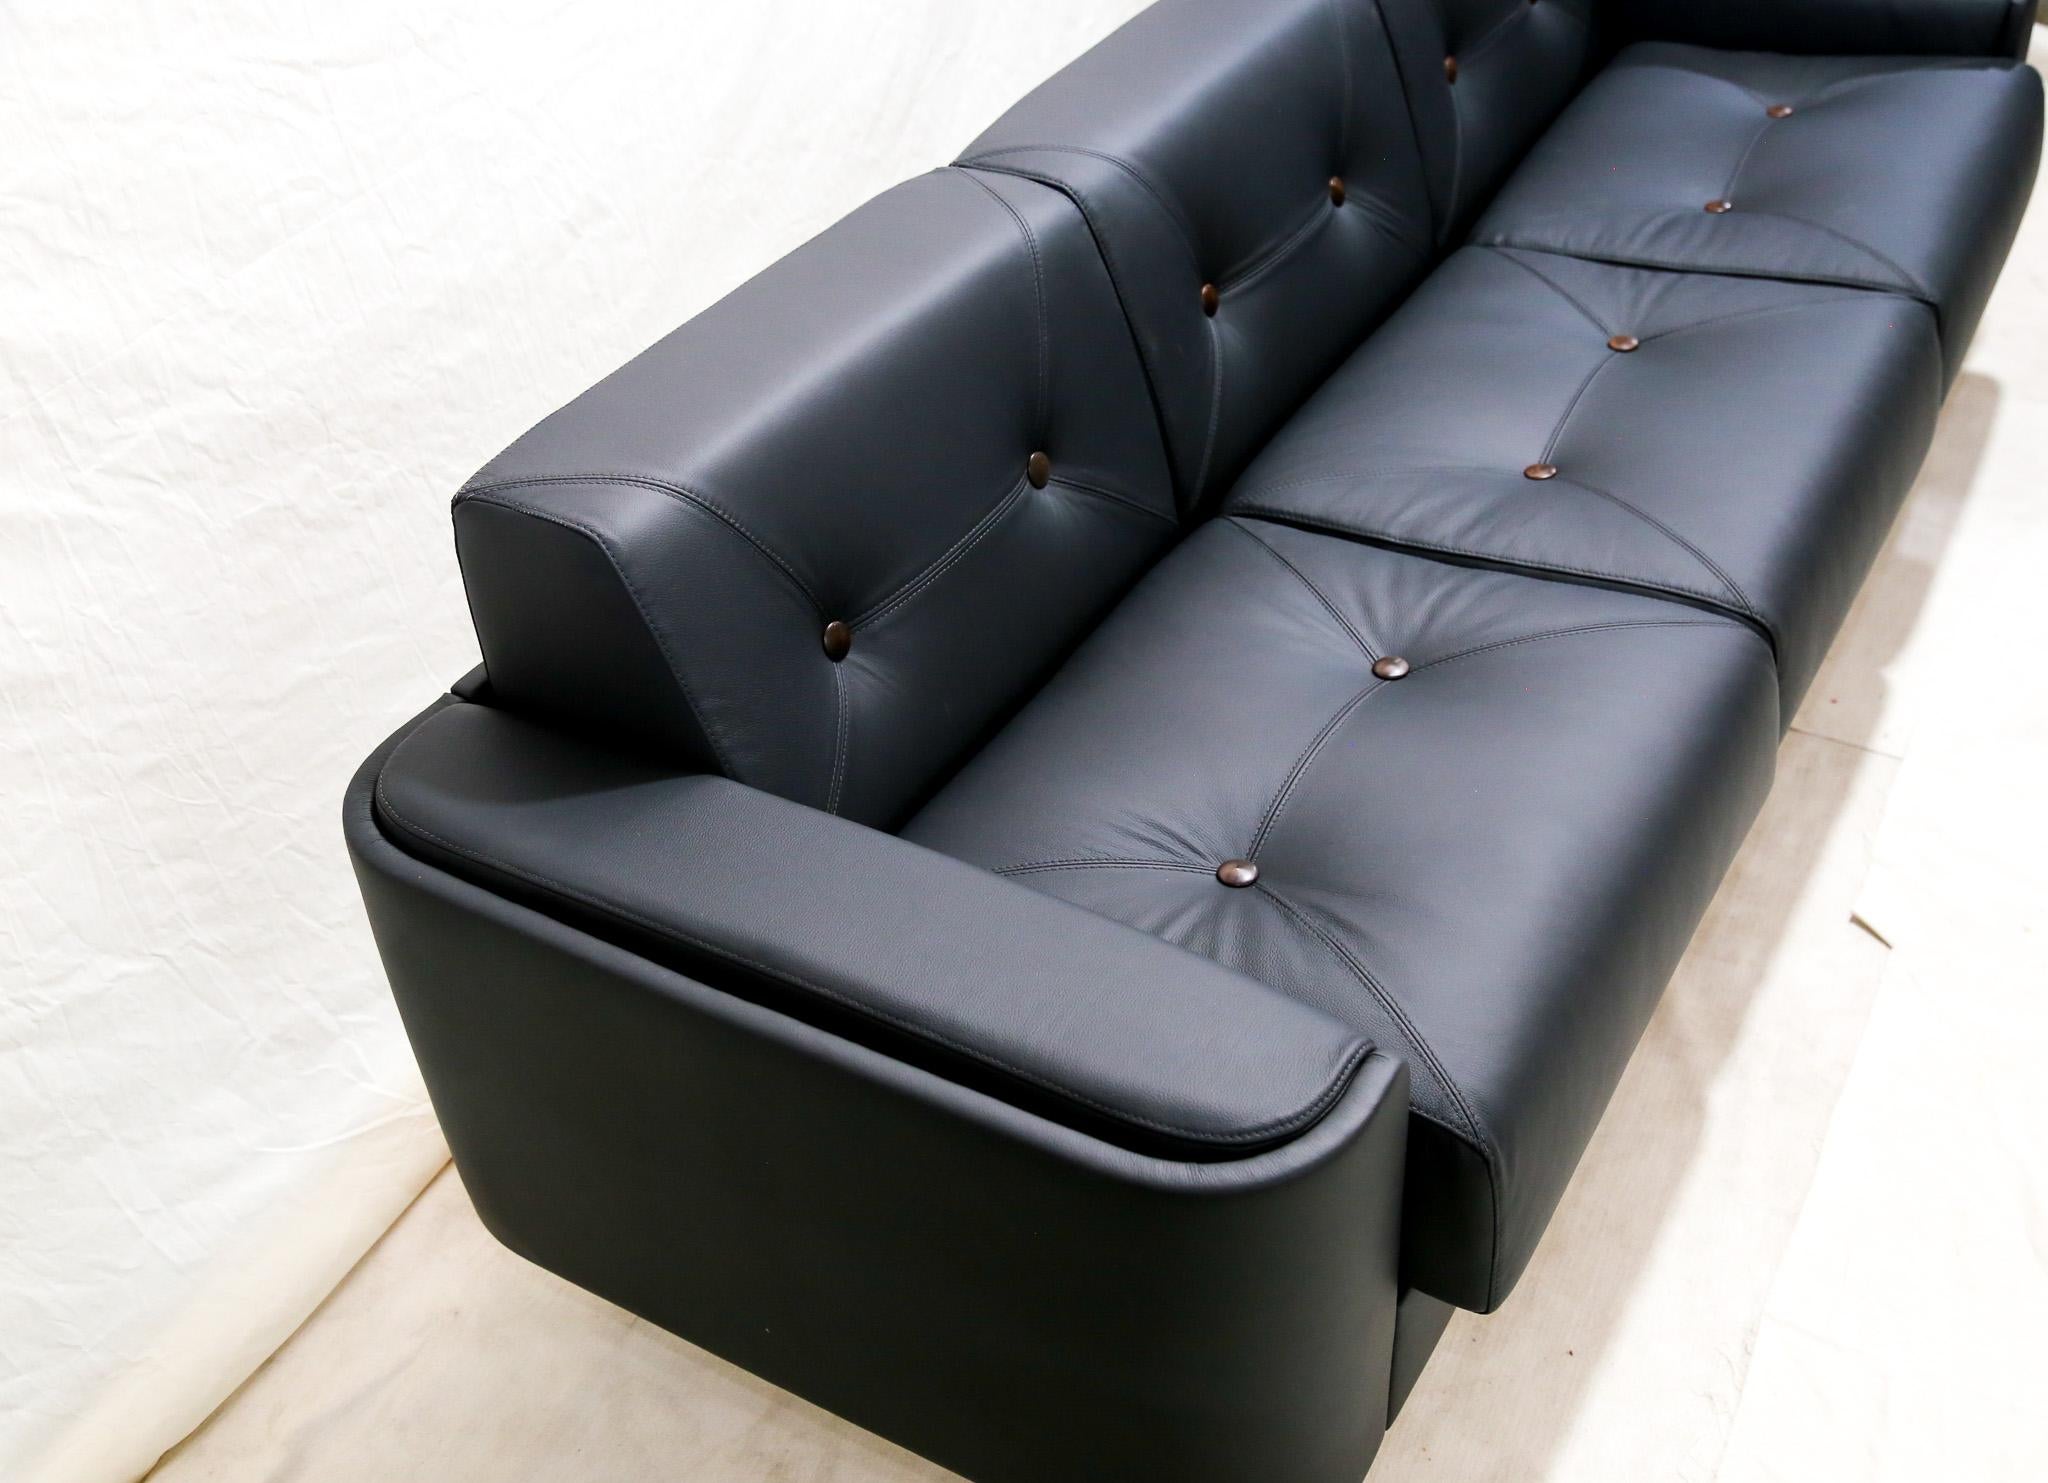 Mid-Century Modern Sofa in Black Leather & Wood by Jorge Zalszupin, Brazil, 1970 For Sale 4